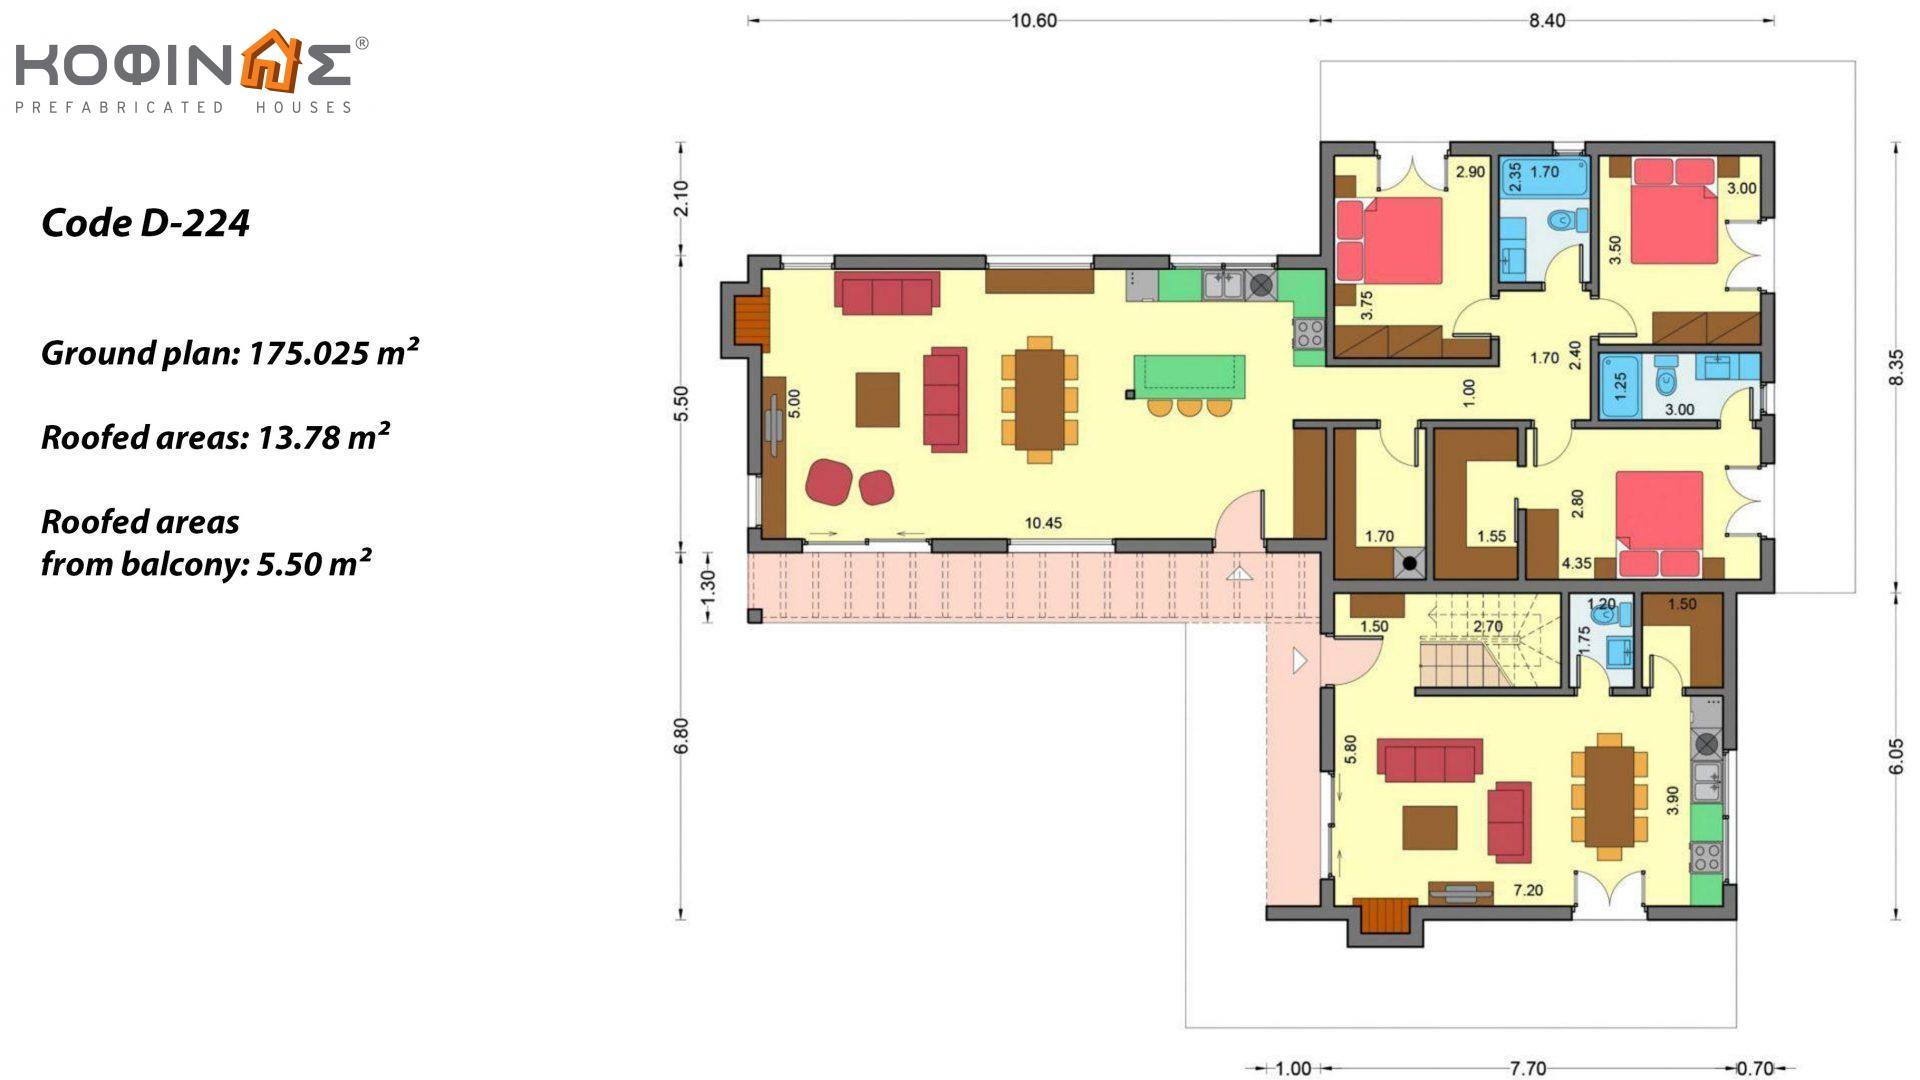 Complex of 2-story houses D-224, total surface of 224,68 m² ,covered roofed areas 24.88 m²,balconies 75.44 m²